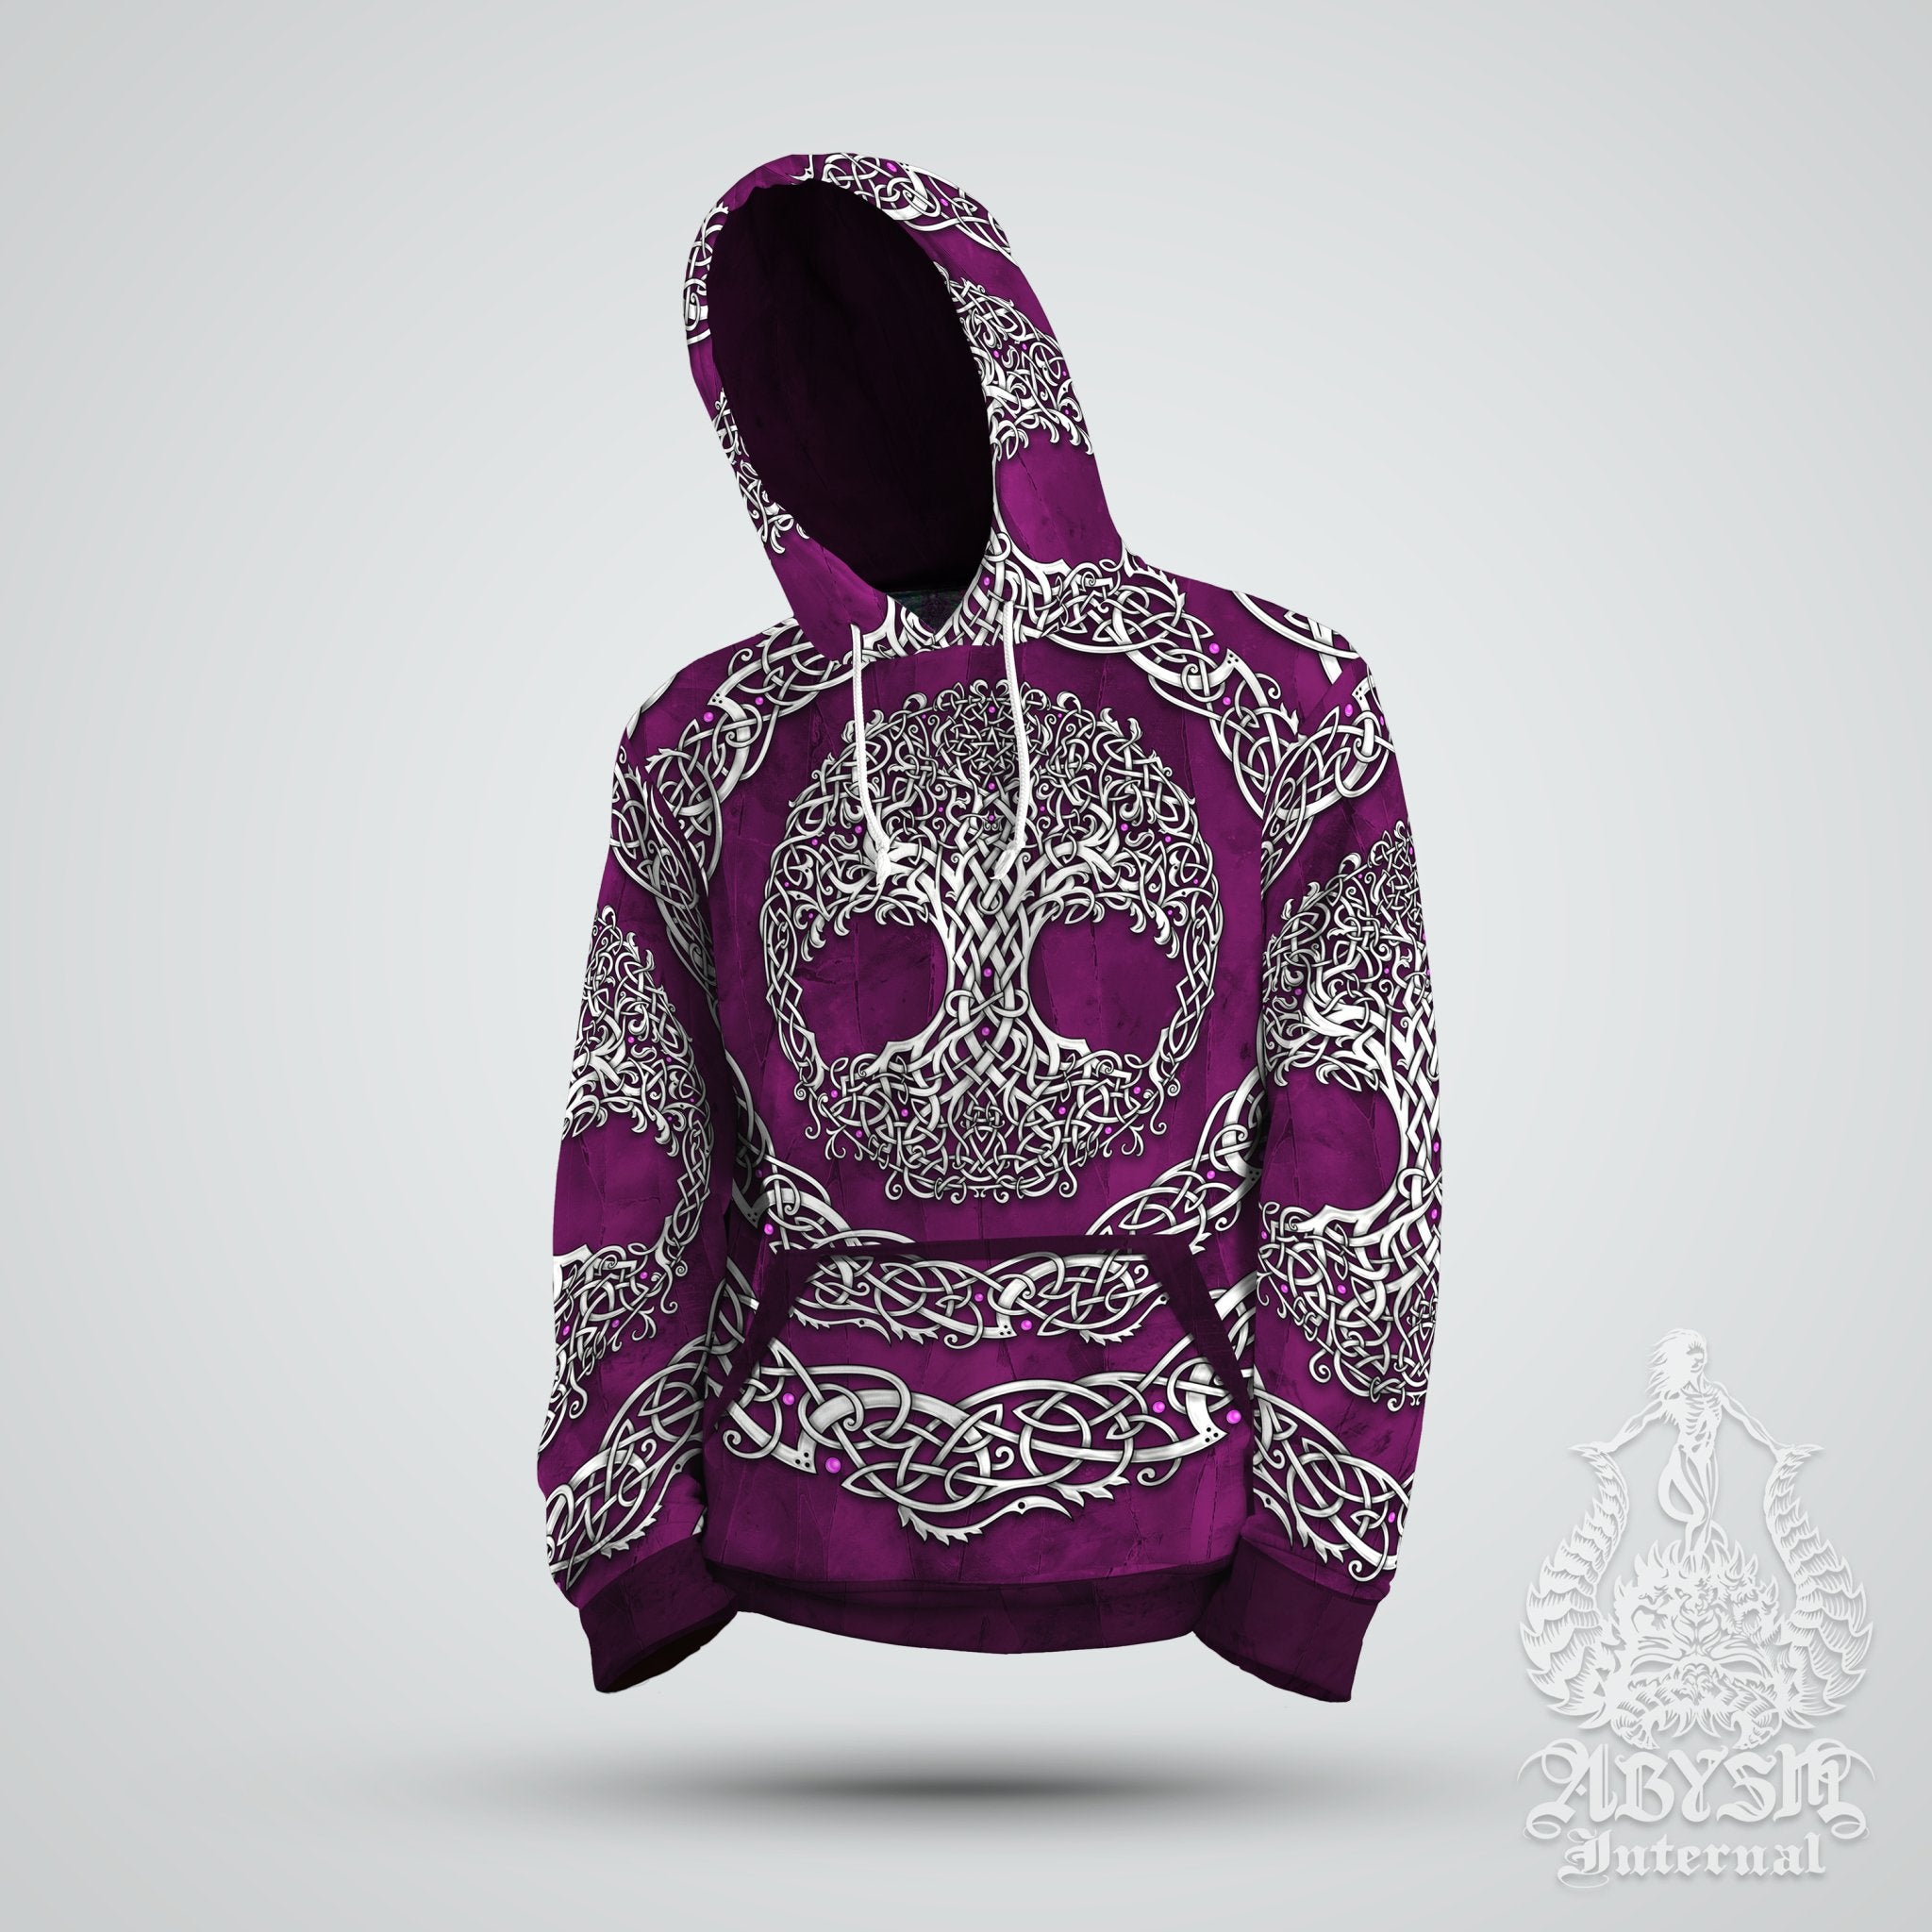 Celtic Hoodie, Nature Pullover, Indie Outfit, Boho Sweater, Tree of Life Streetwear, Witchy Clothing, Unisex - White and Green, Purple or Black, 3 Colors - Abysm Internal